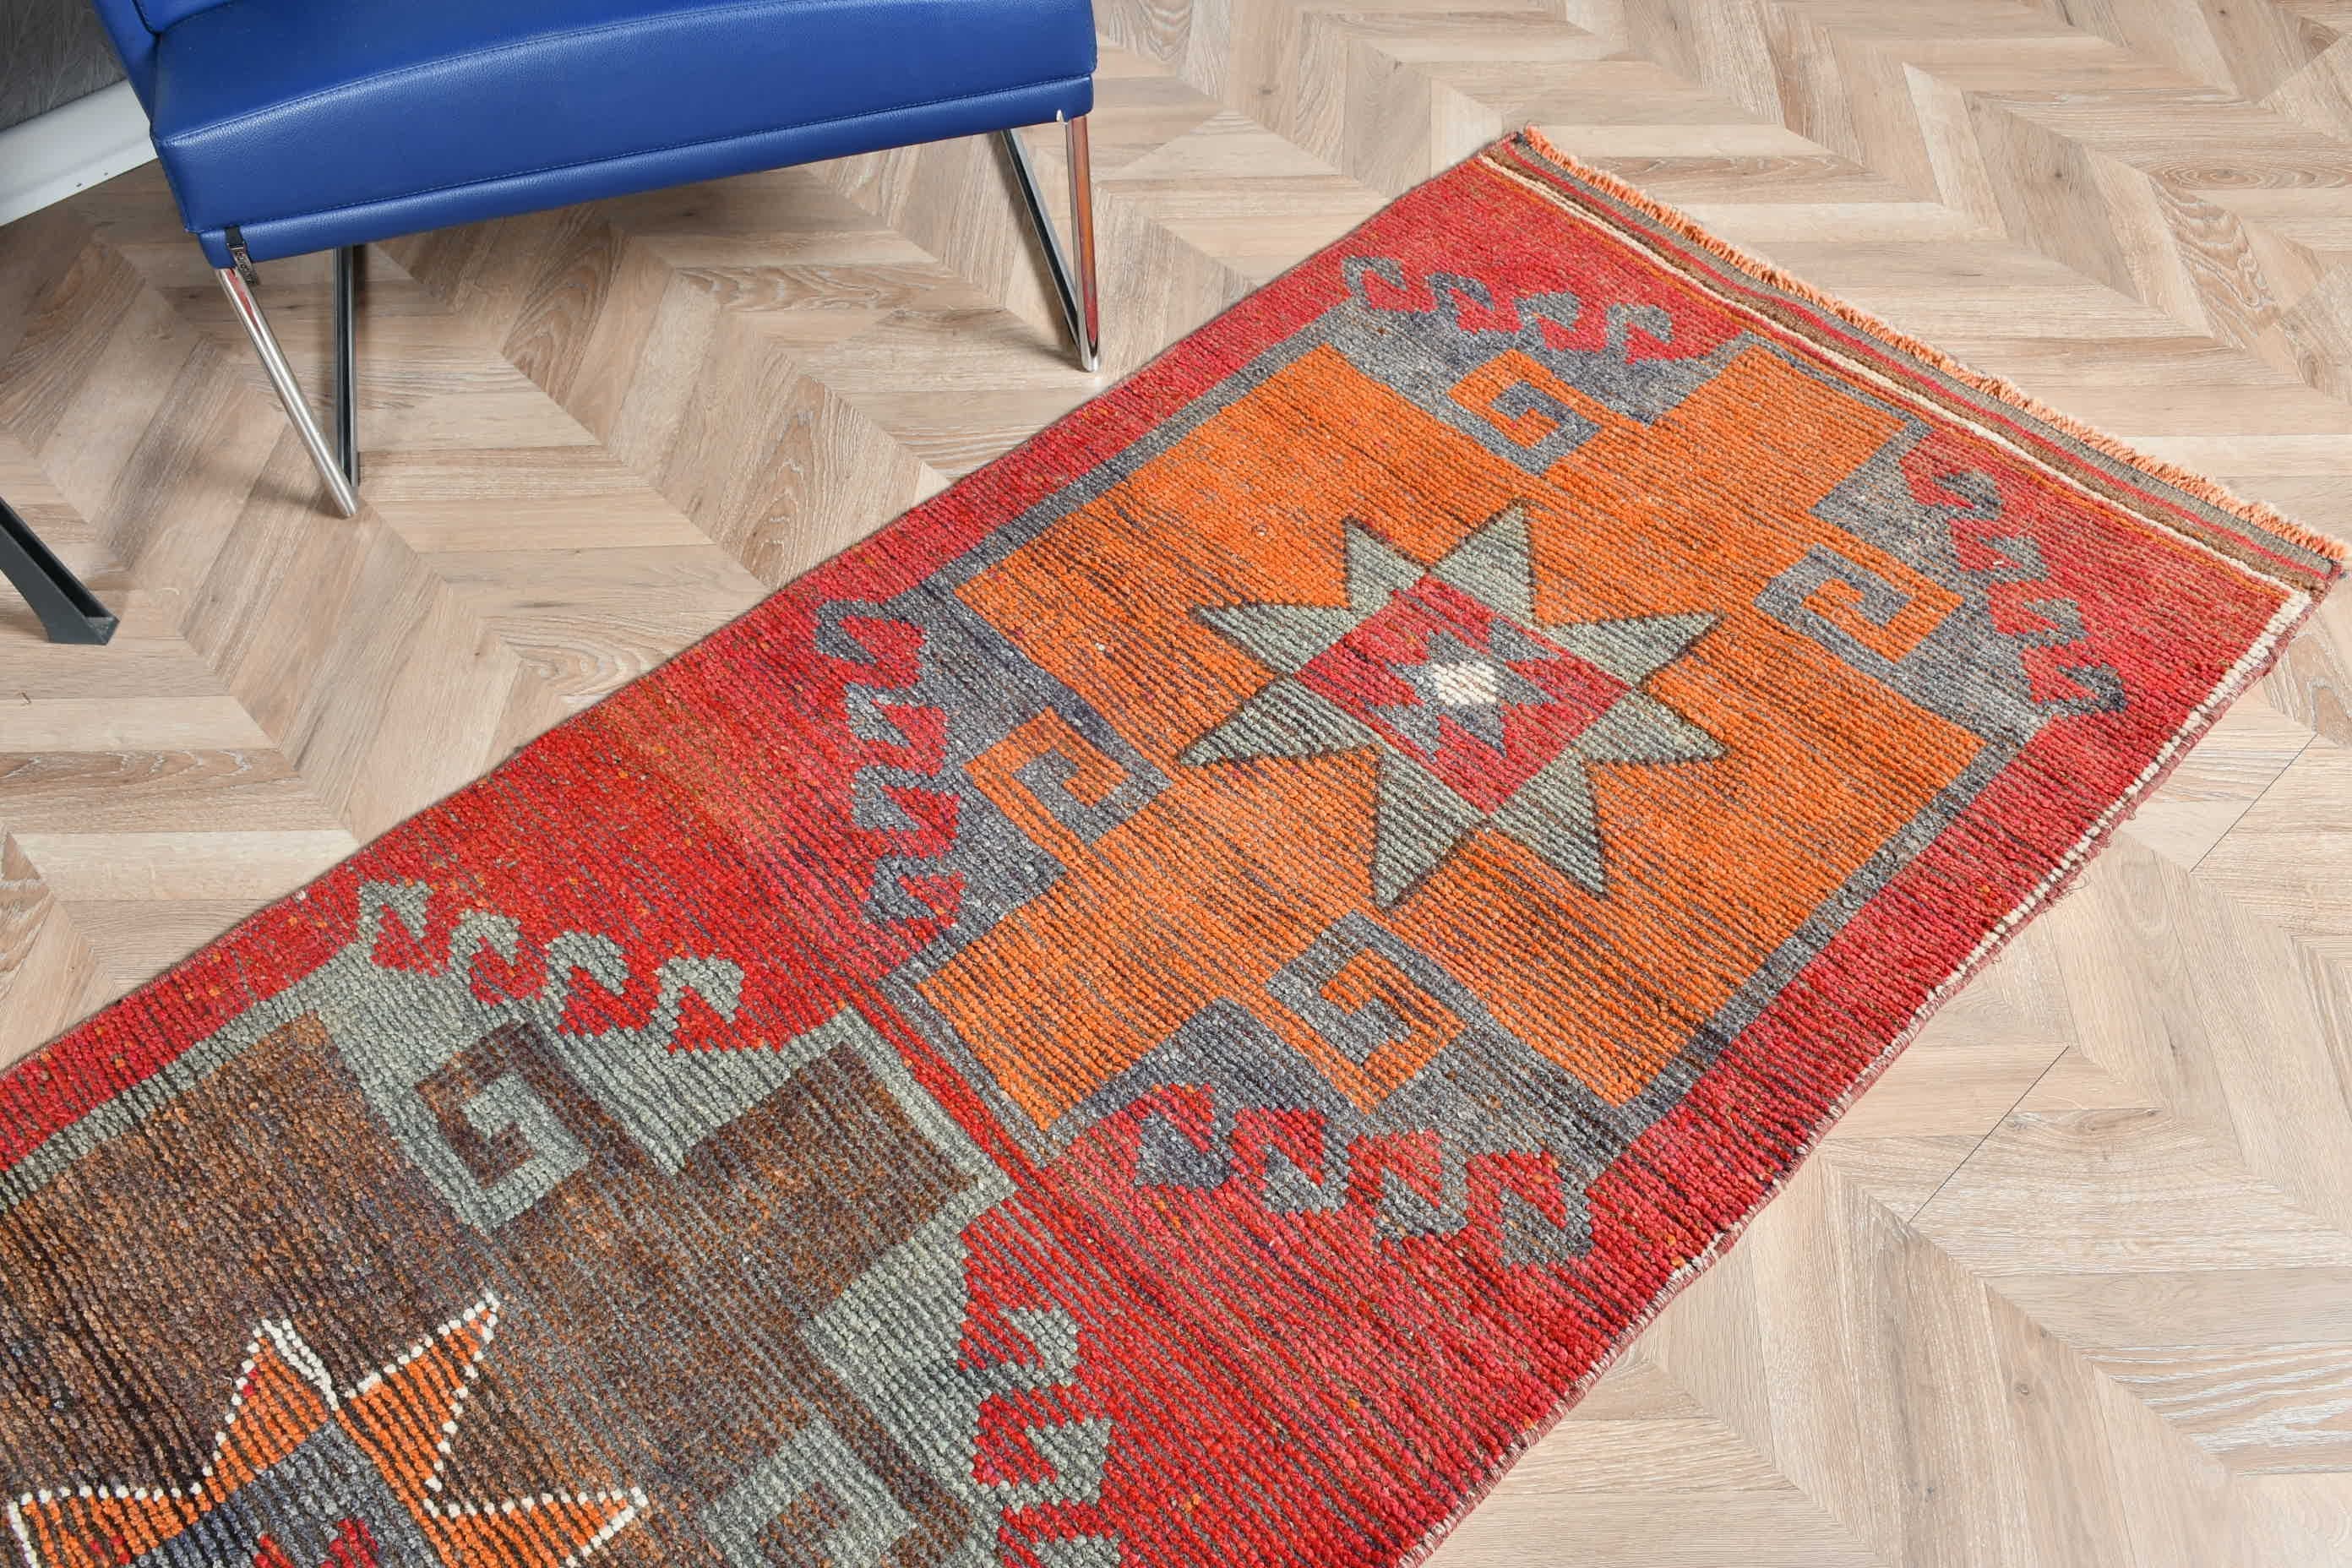 Turkish Rug, 3x11.3 ft Runner Rug, Corridor Rug, Bright Rugs, Rugs for Kitchen, Anatolian Rugs, Red Wool Rugs, Vintage Rugs, Home Decor Rug